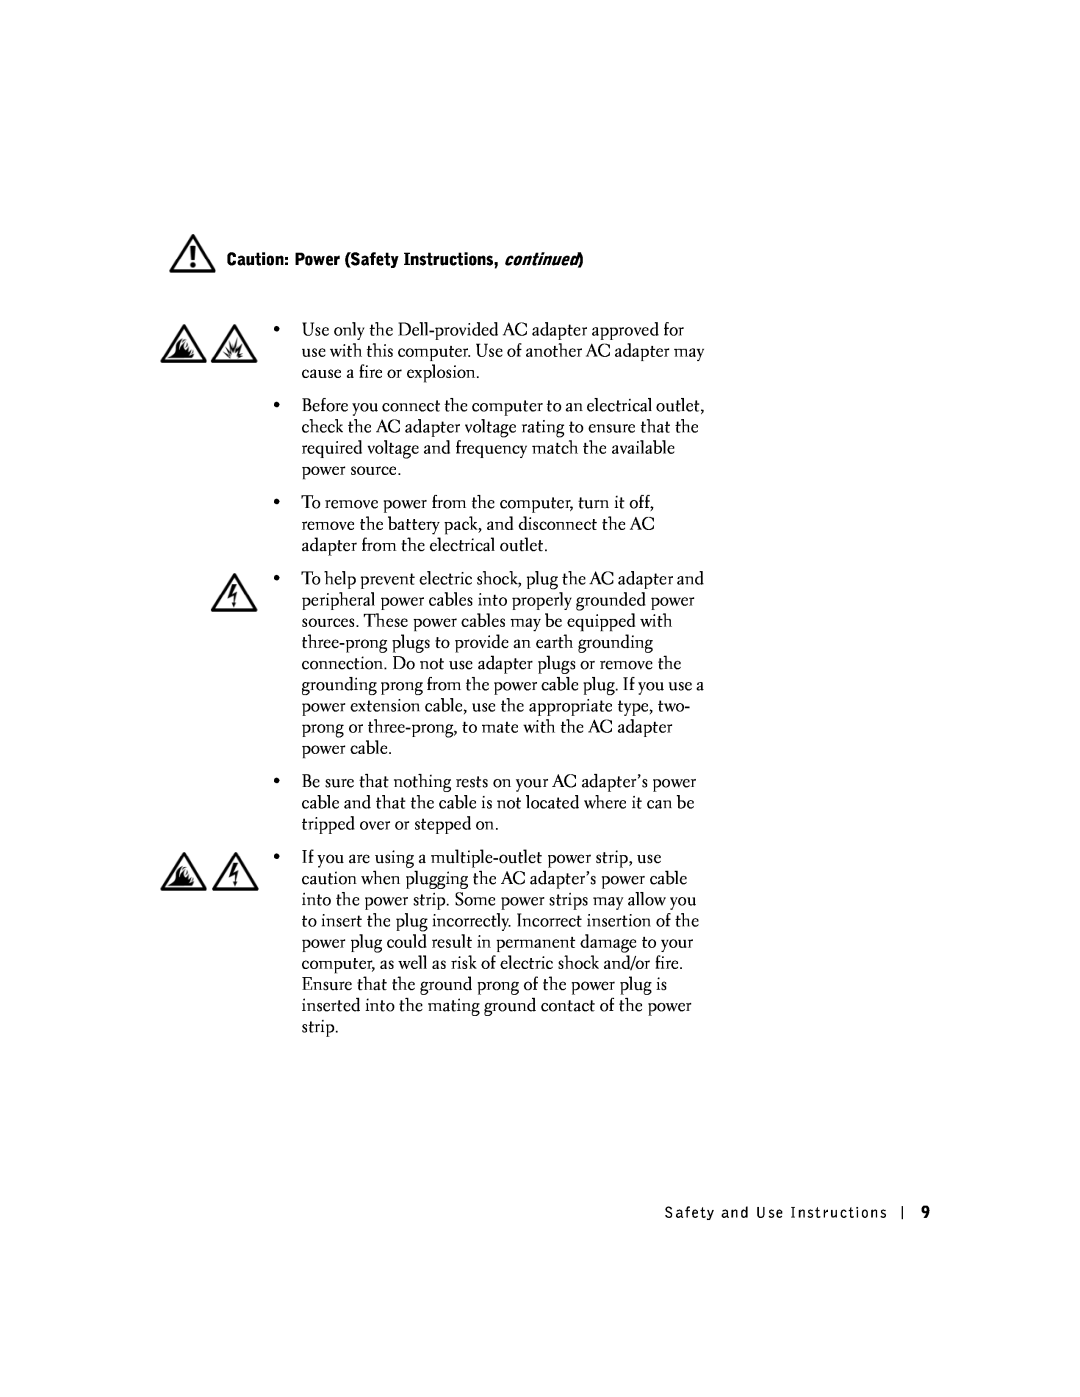 Dell 100N owner manual Caution Power Safety Instructions, continued 